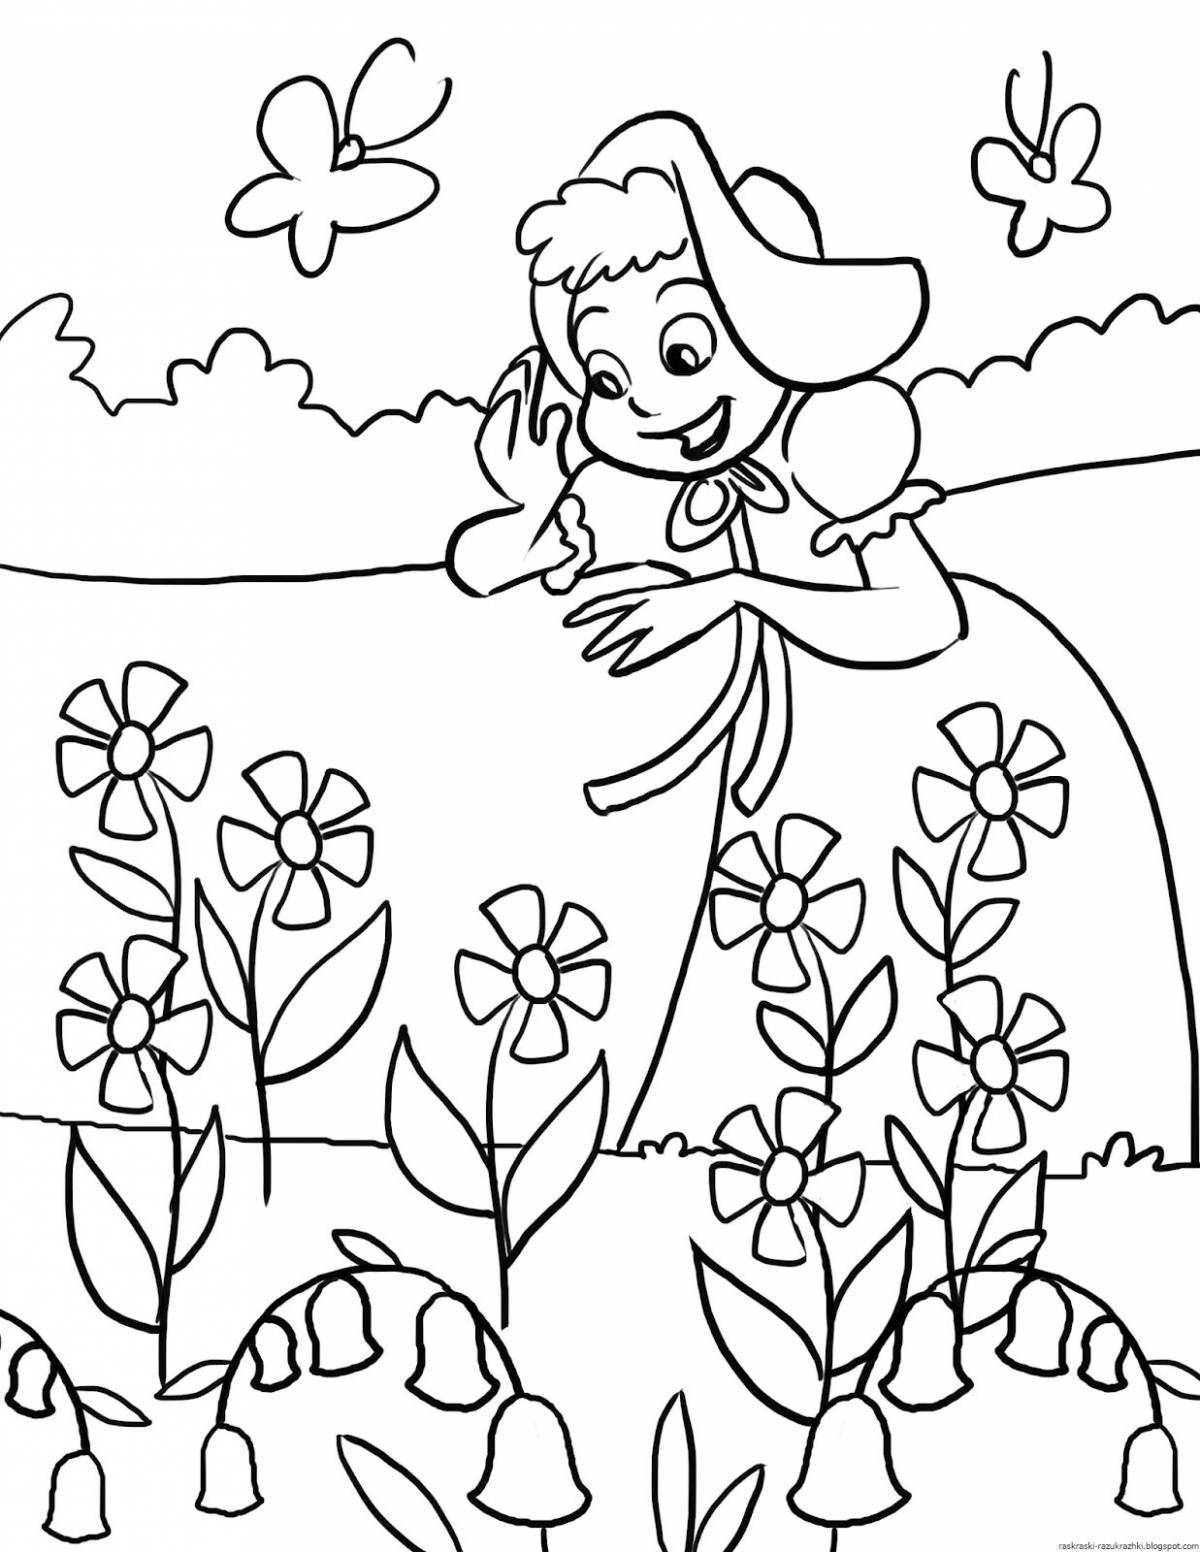 Live spring coloring for kids